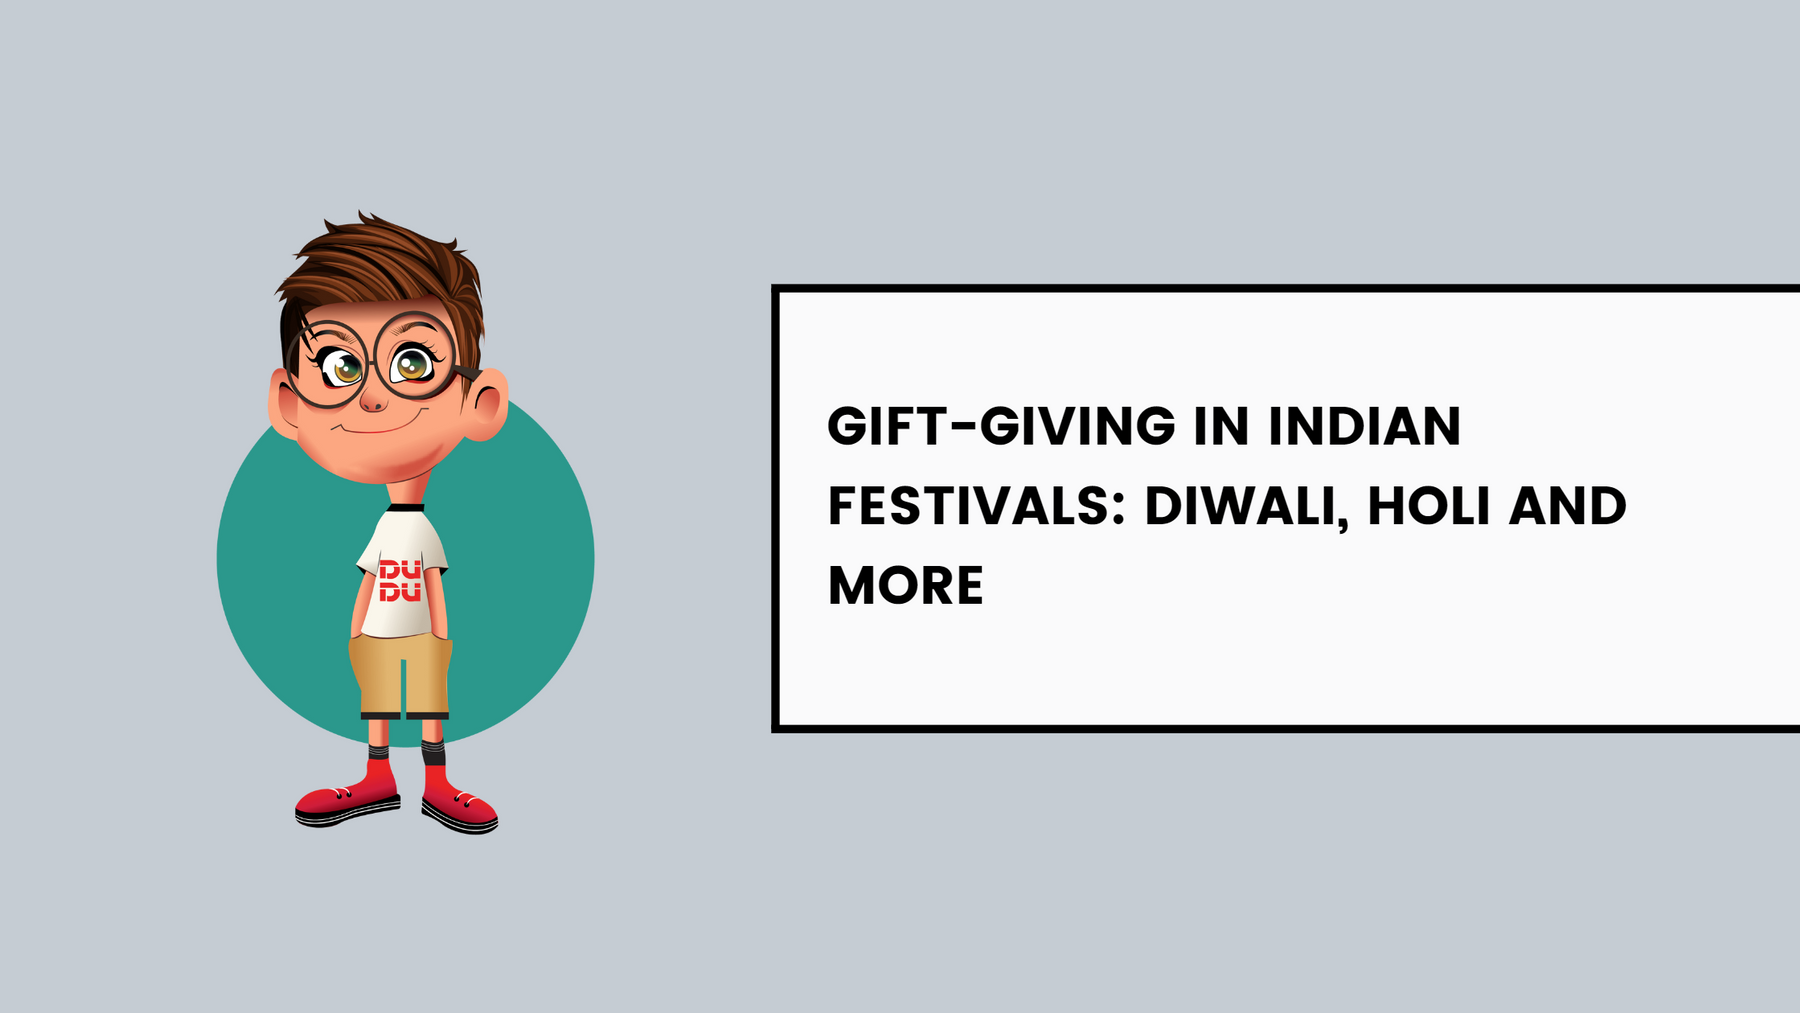 Gift-Giving In Indian Festivals: Diwali, Holi And More